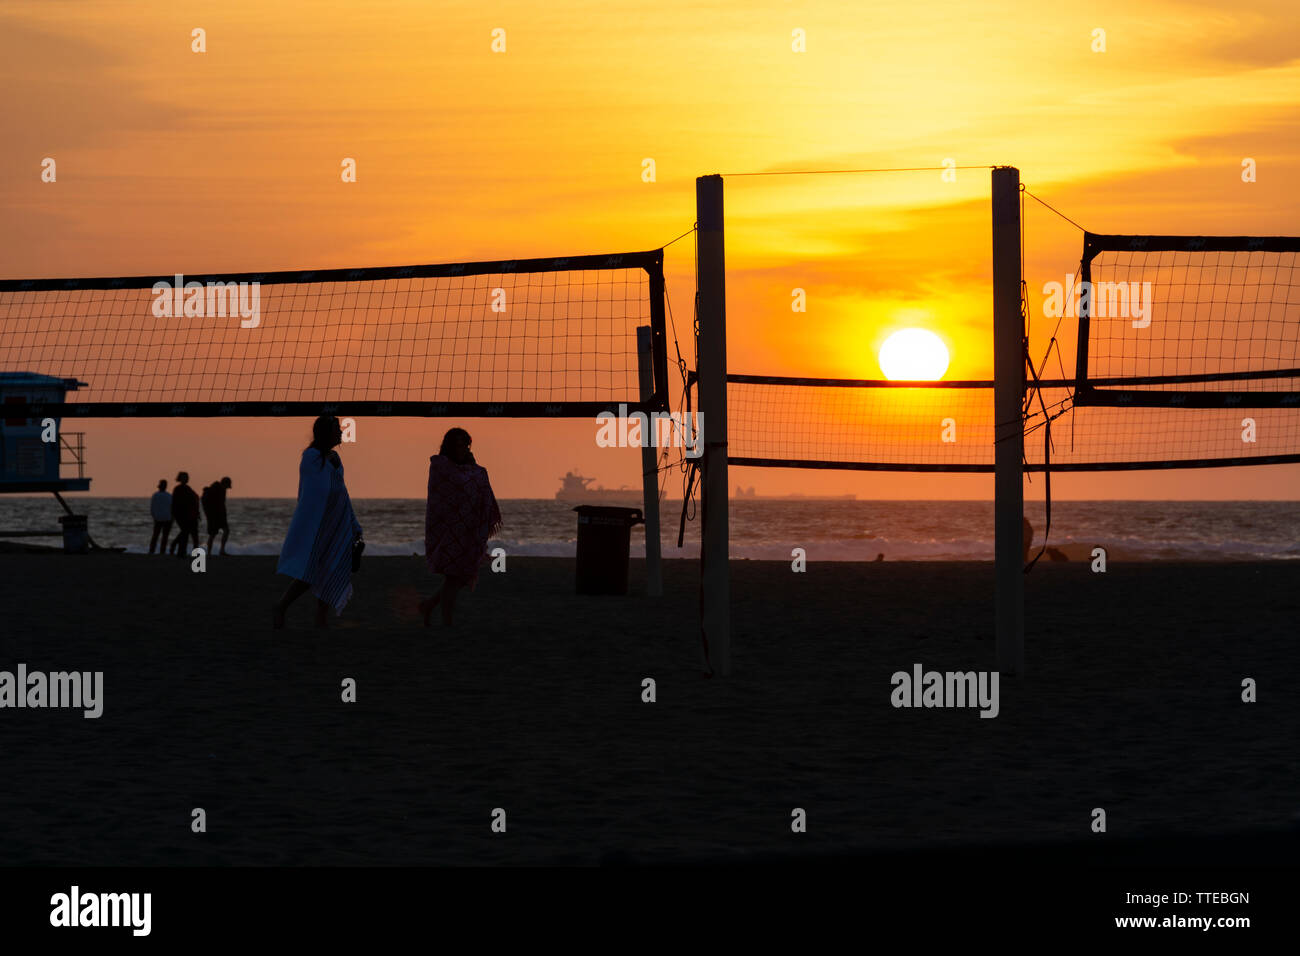 Huntington Beach, CA / USA - March 25, 2019: Silhouettes of people enjoying the beach by the volleyball nets during a fiery and glowing sunset. Stock Photo